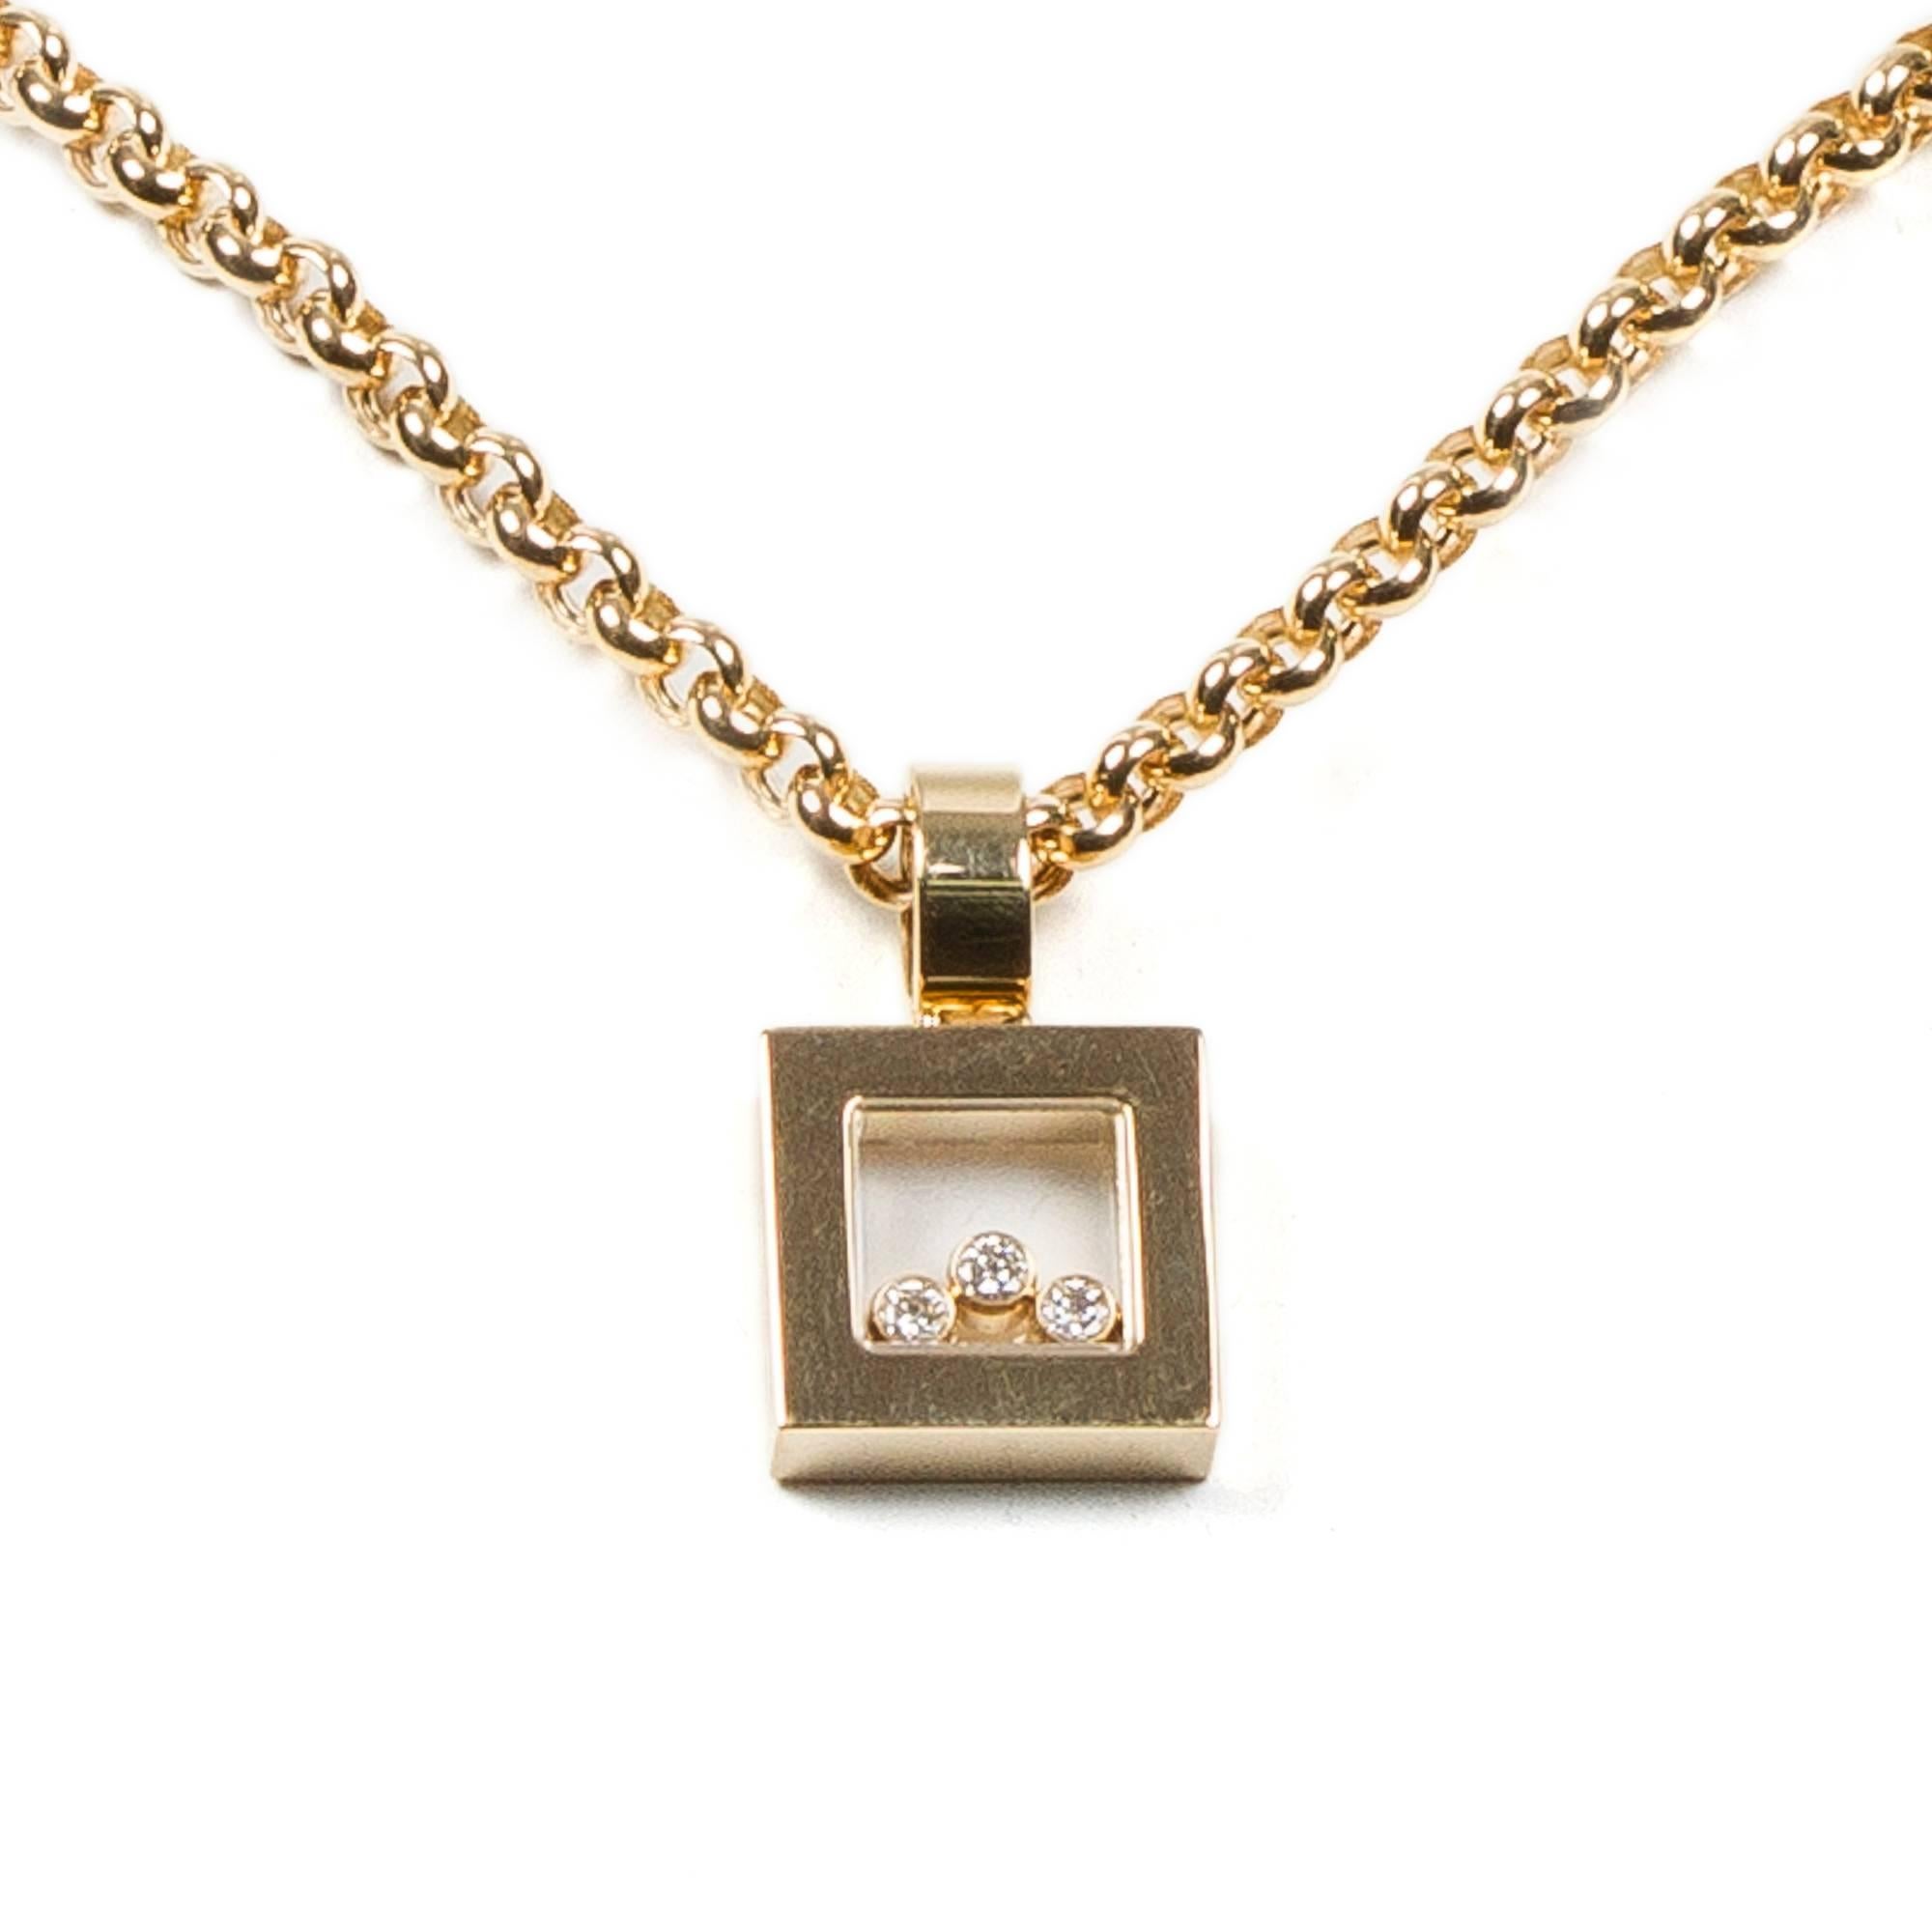 Happy Diamond Square necklace in 750 yellow gold with 3 diamonds. Belcher chain with lobster claw claps closure (Lenght of 42cm). Hallmarks on the pendant  